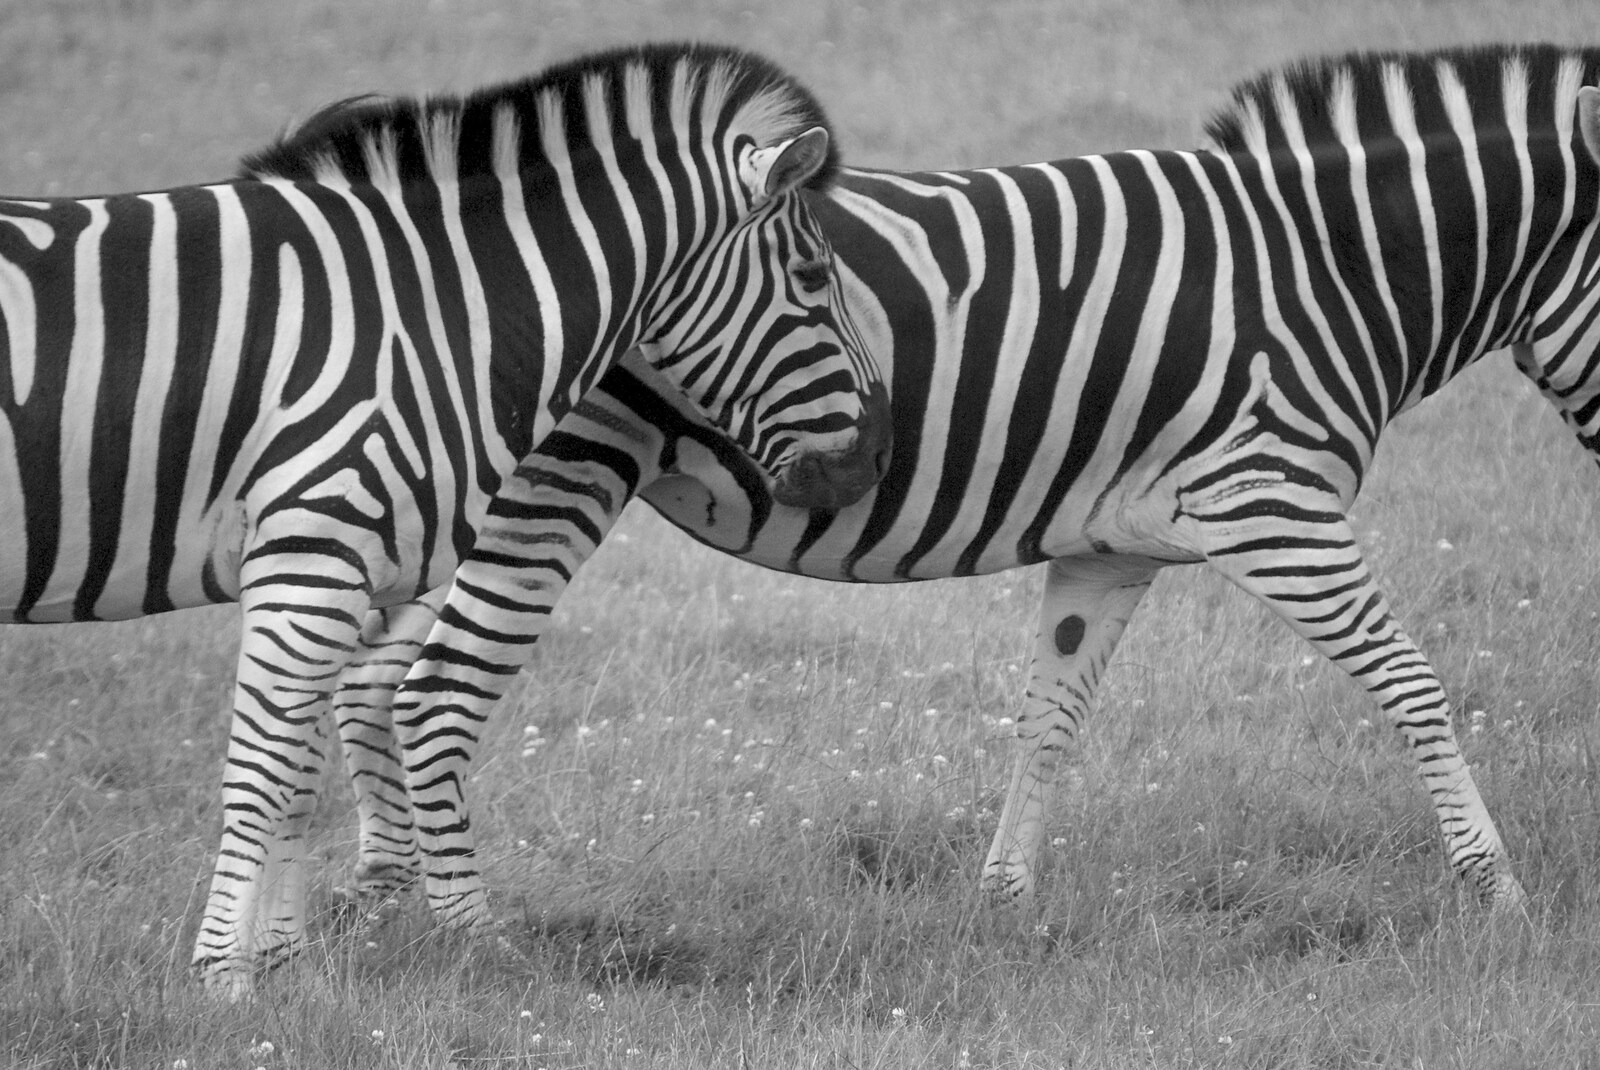 A pair of zebra from The BBs in a Garden, and a Qualcomm Safari, Woburn, Bedfordshire - 22nd July 2007